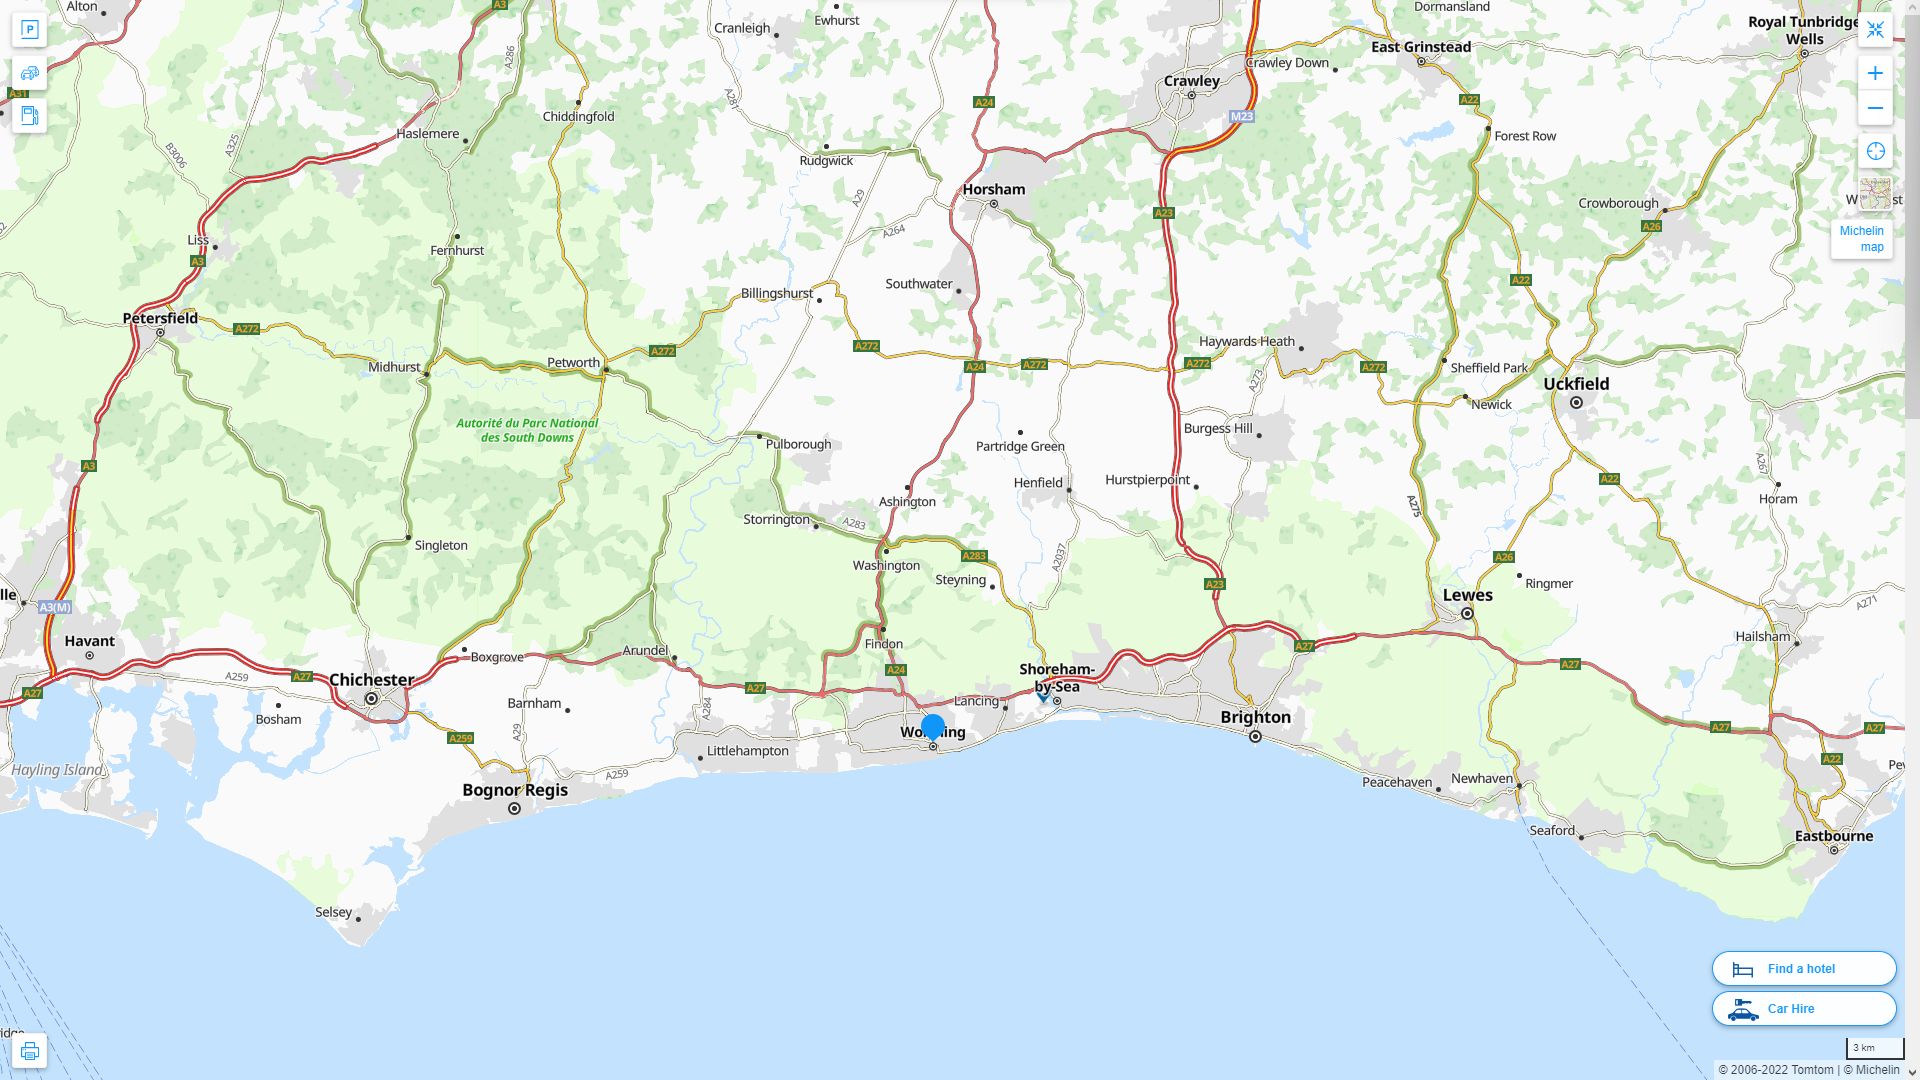 Worthing Highway and Road Map